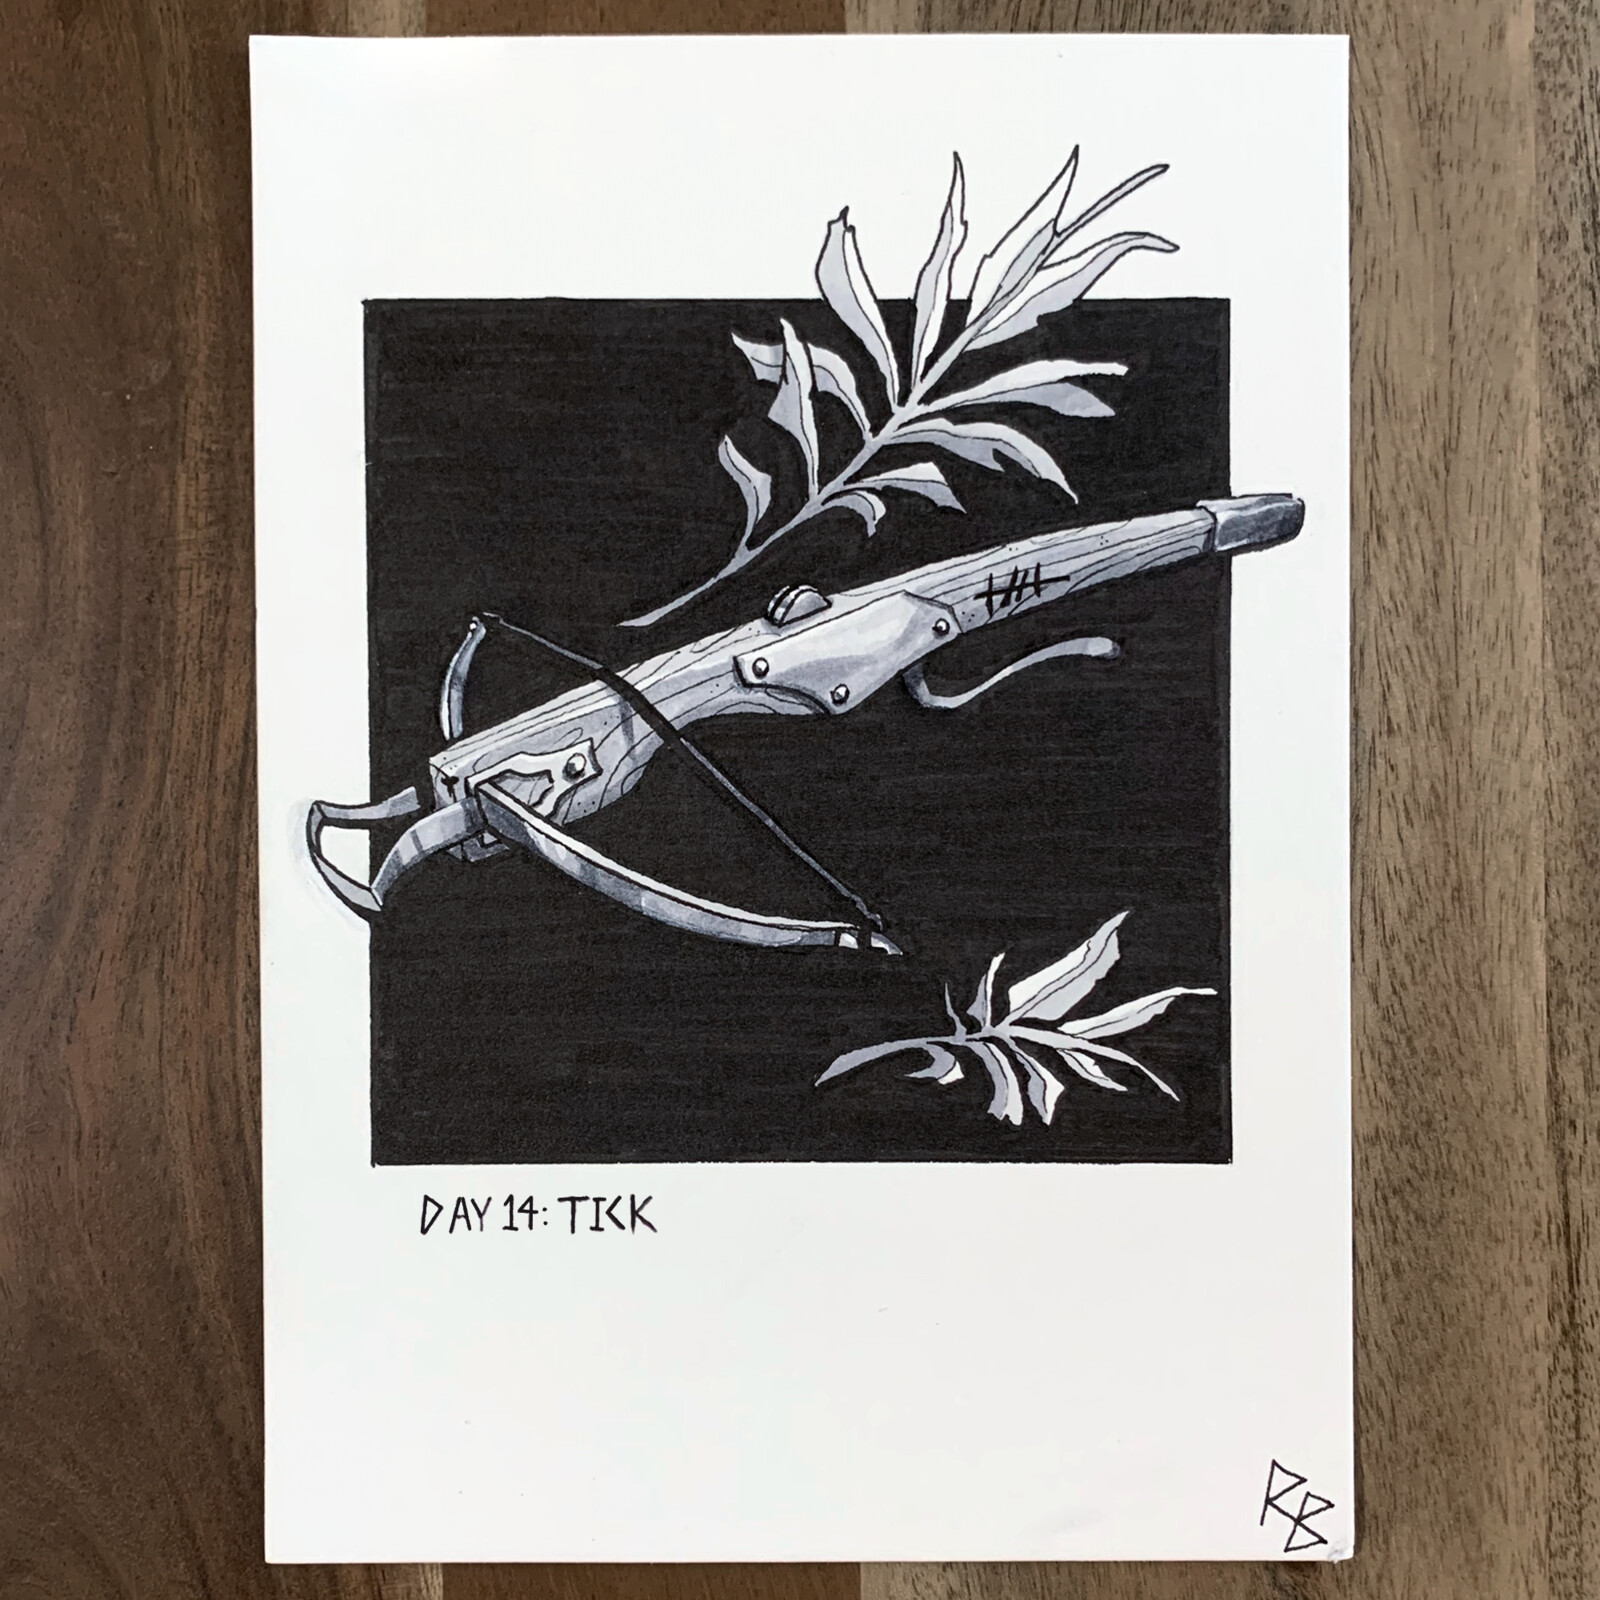 (Day 14: Tick) Another Tick in the Yew